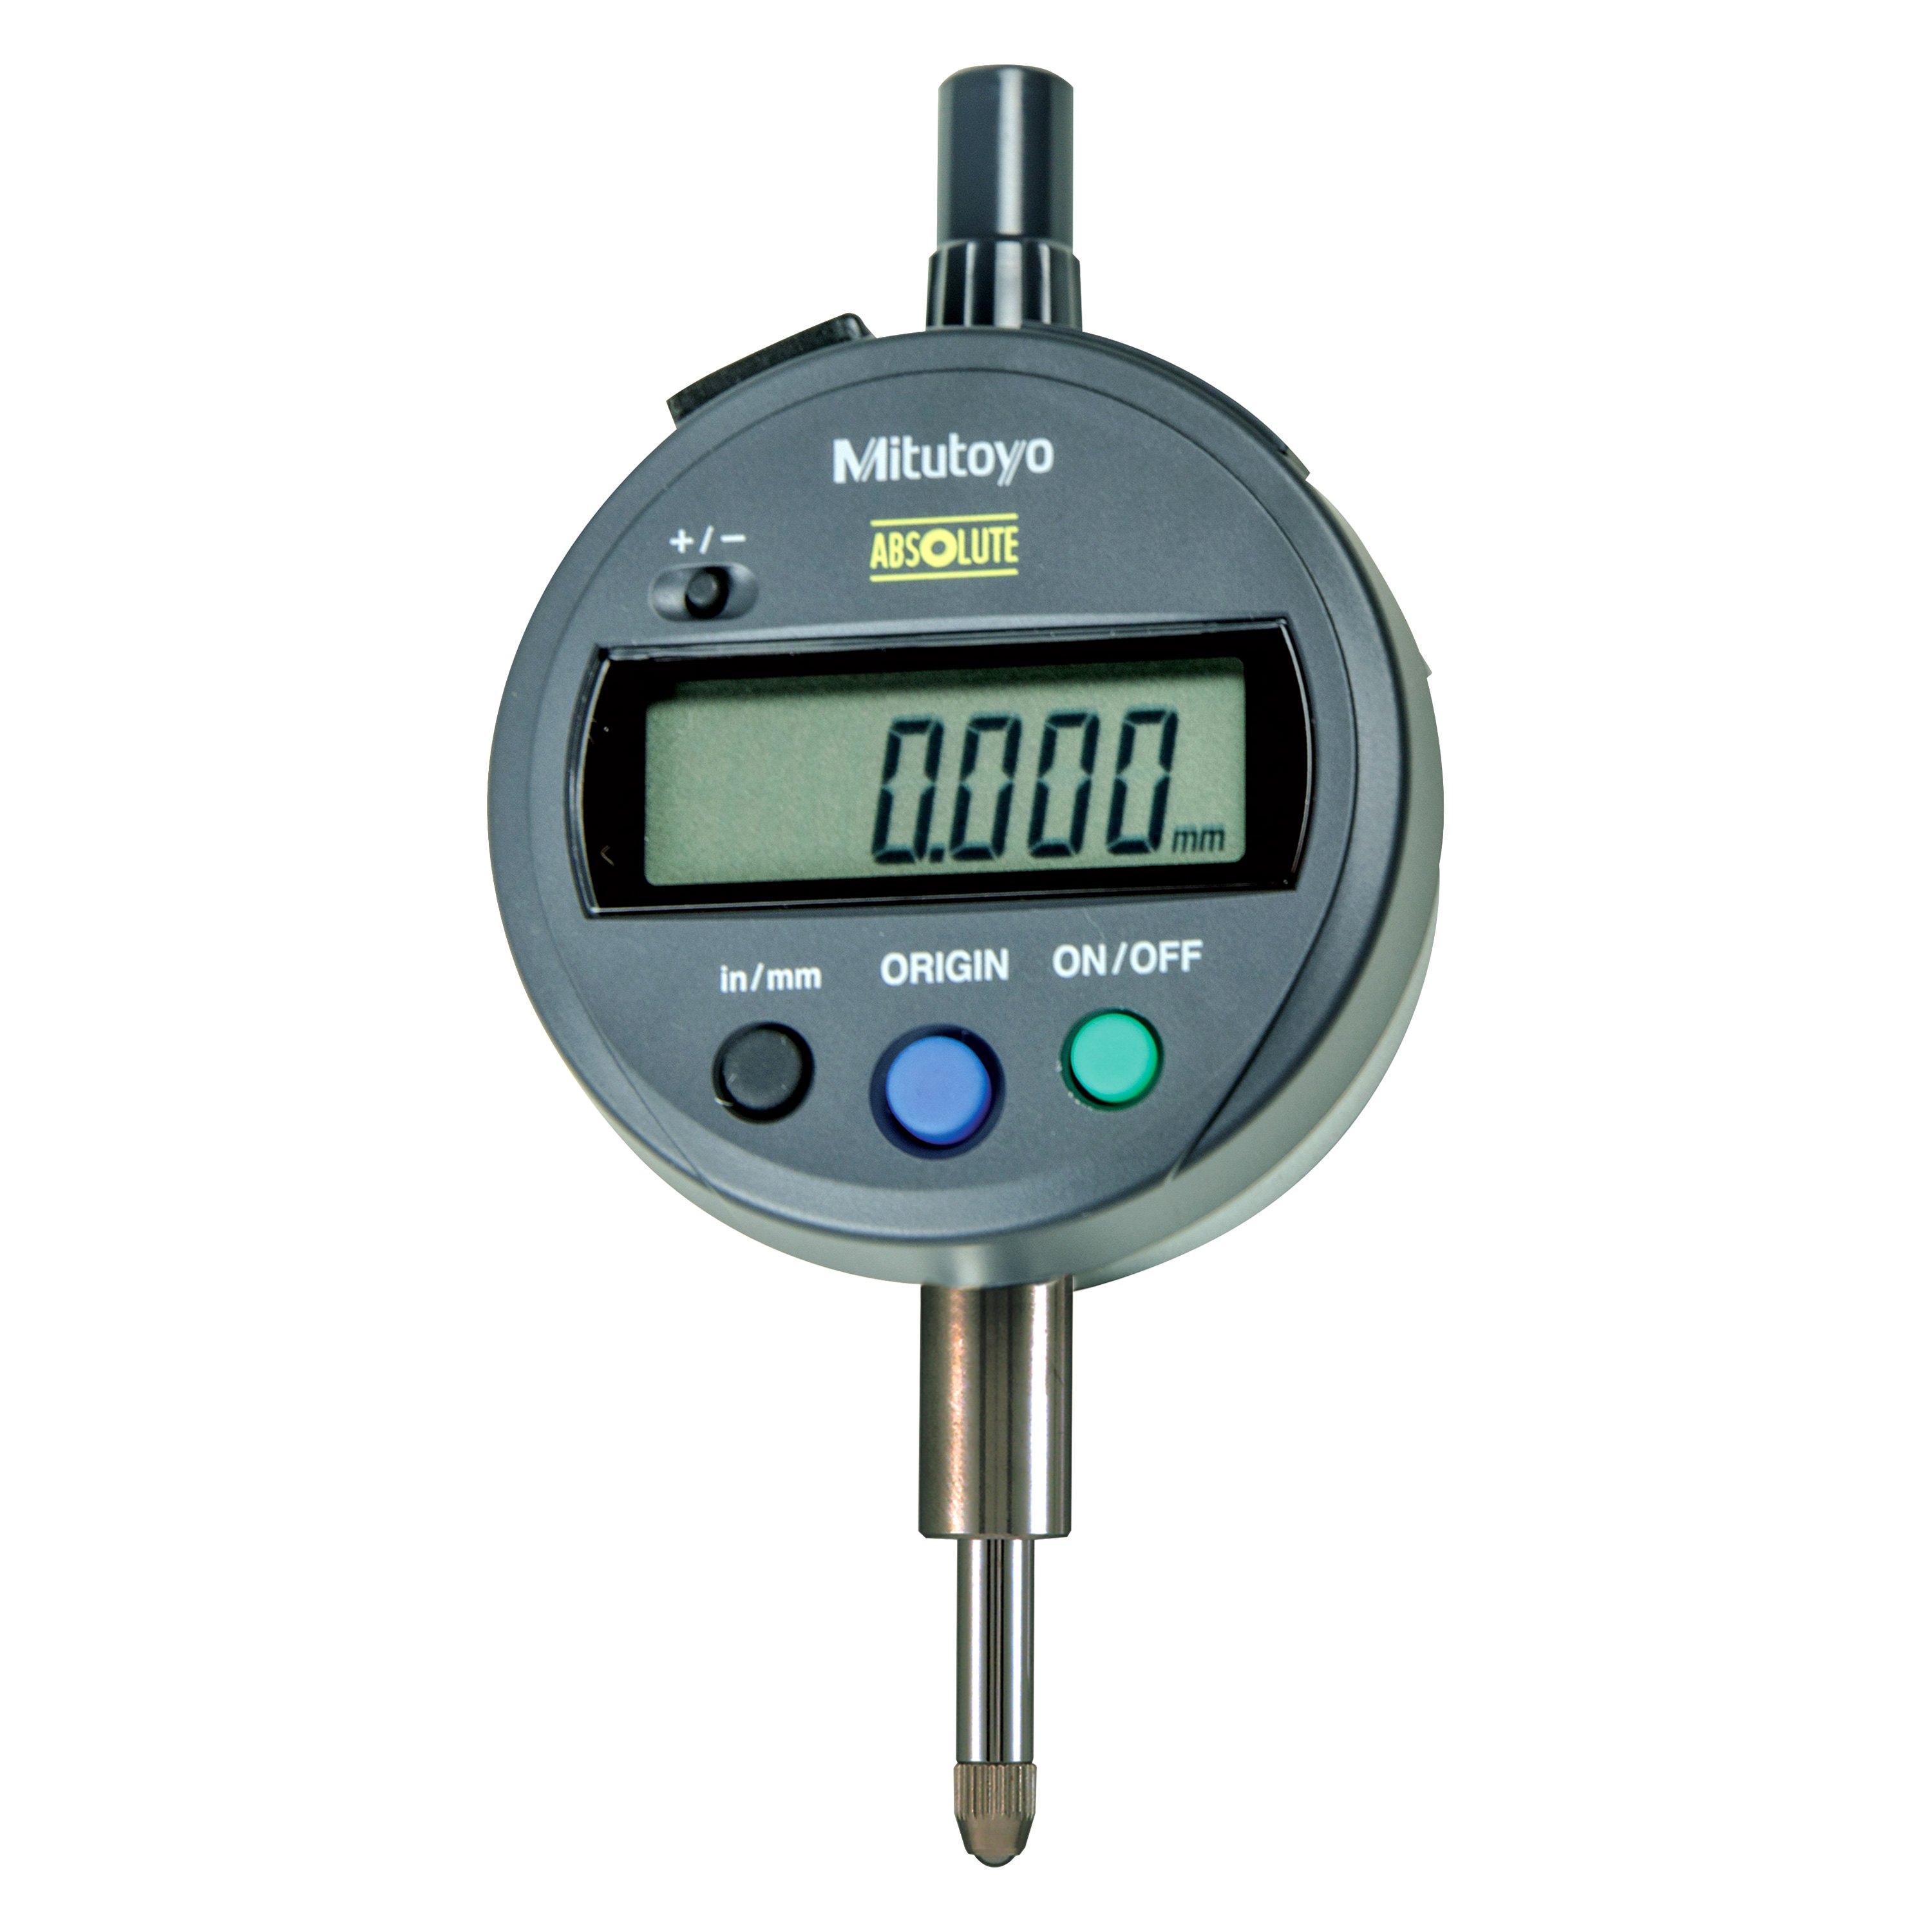 mitutoyo-543-791-543-series-0-to-0-5-sae-and-metric-digital-absolute-indicator-with-simple